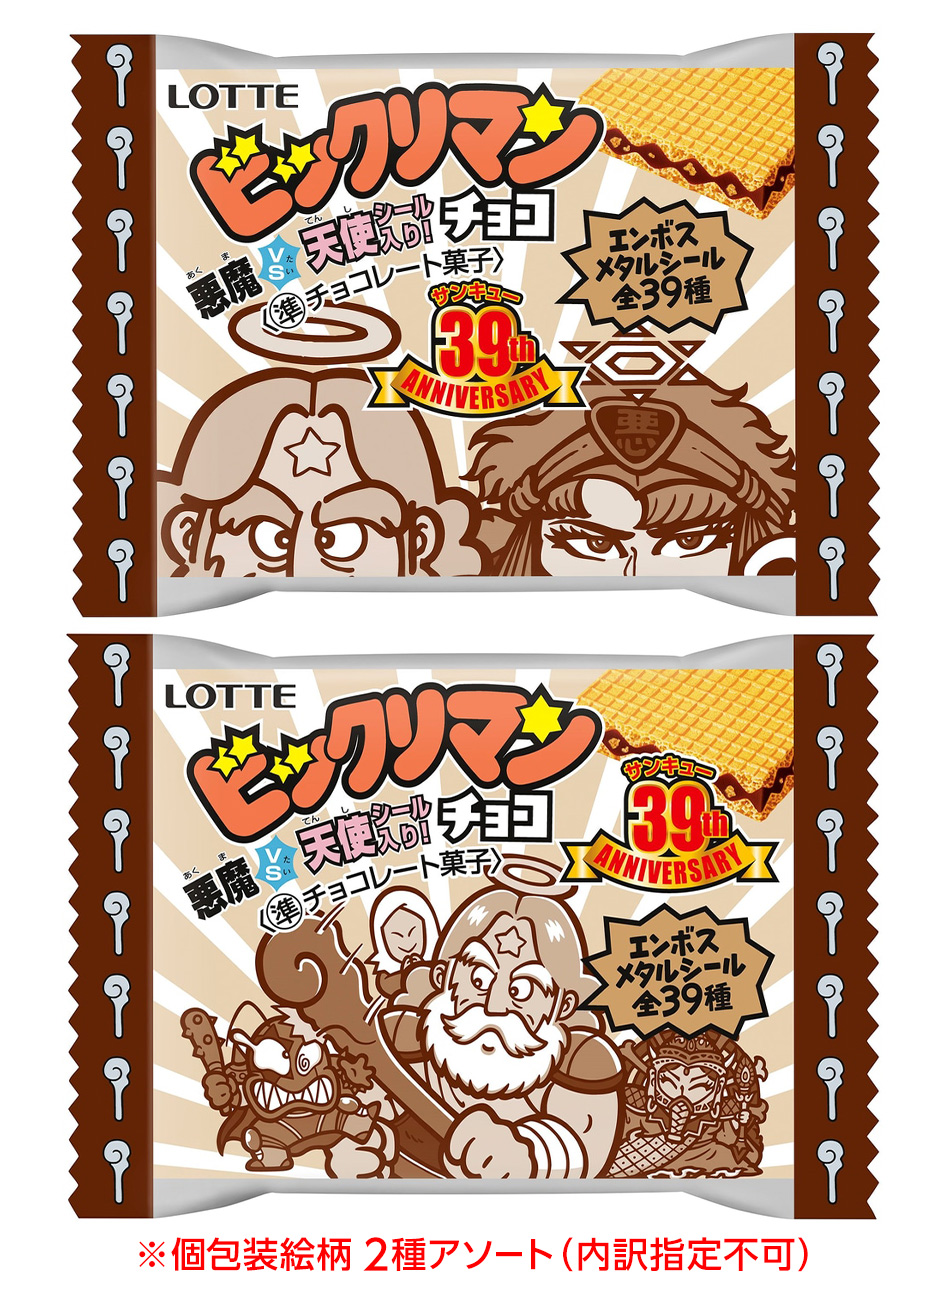  Lotte box . Bikkuri man demon VS angel 39th ANNIVERSARY 30 piece equipment go in cheap sweets dagashi confection payment on delivery * deferred payment settlement un- possible Okinawa * remote island shipping un- possible reservation goods 6/18 on and after shipping expectation free shipping 